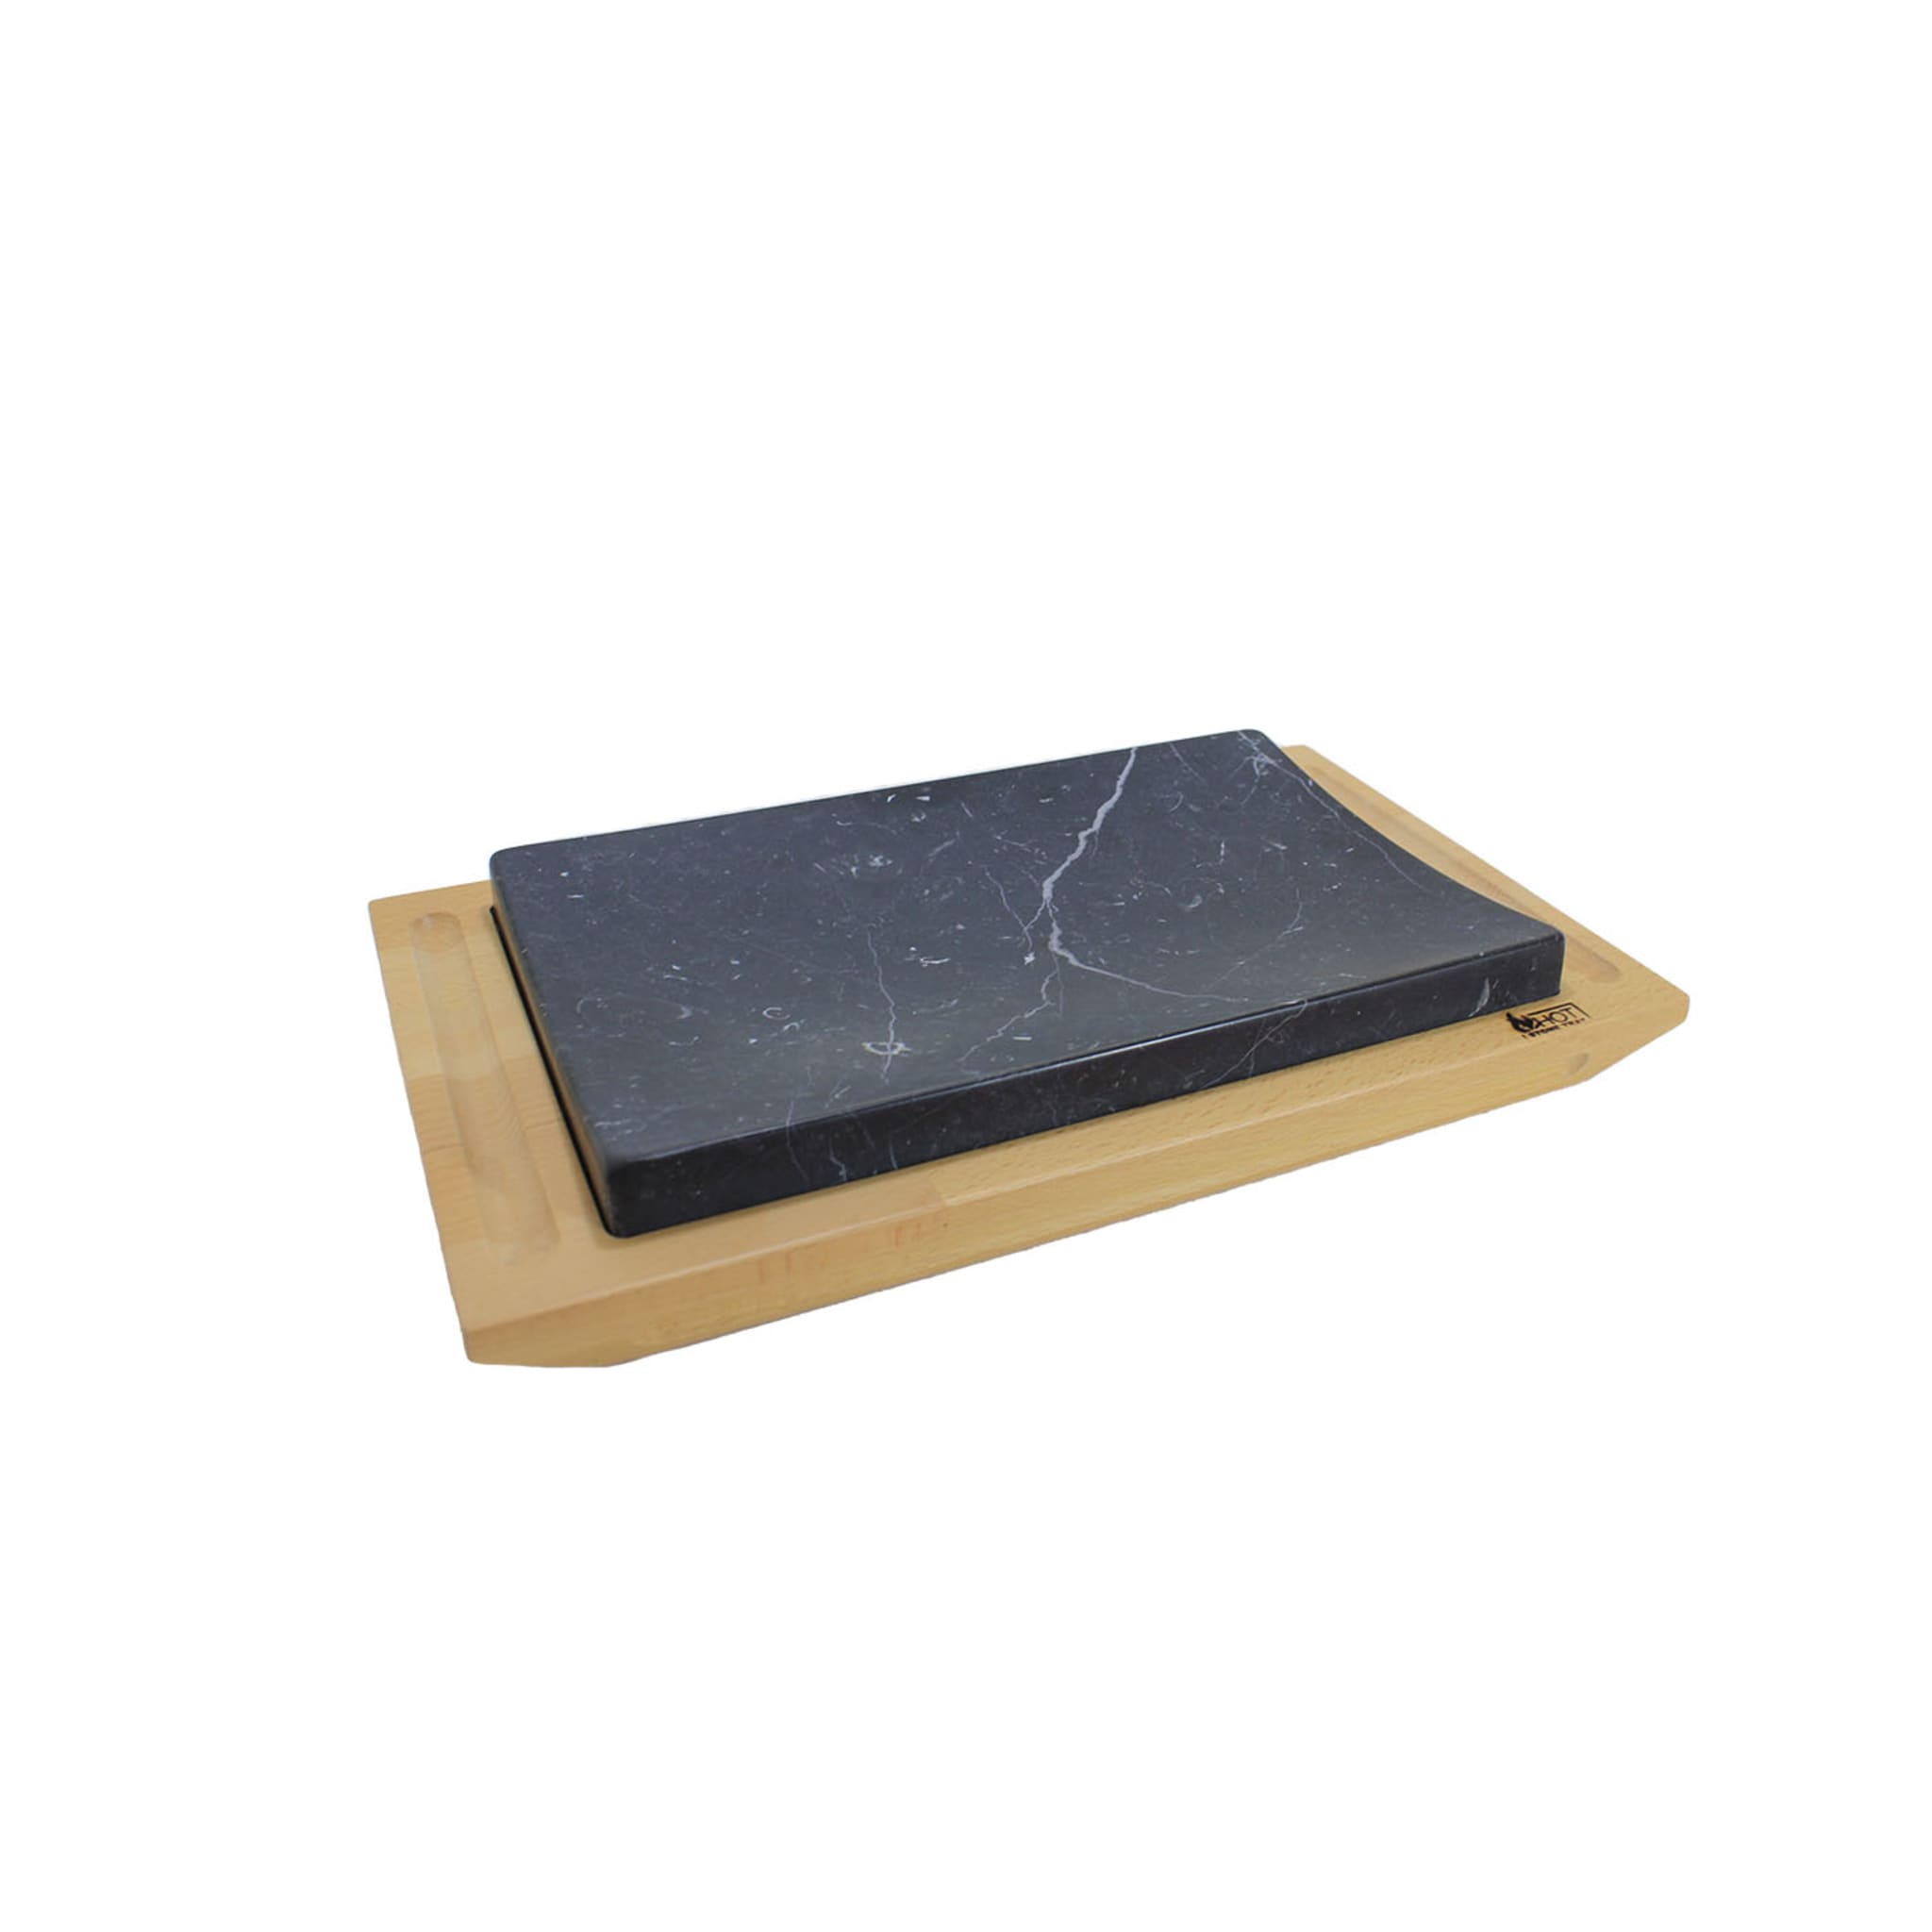 Concave Black Marquinia Tray with Wooden Base - Alternative view 1